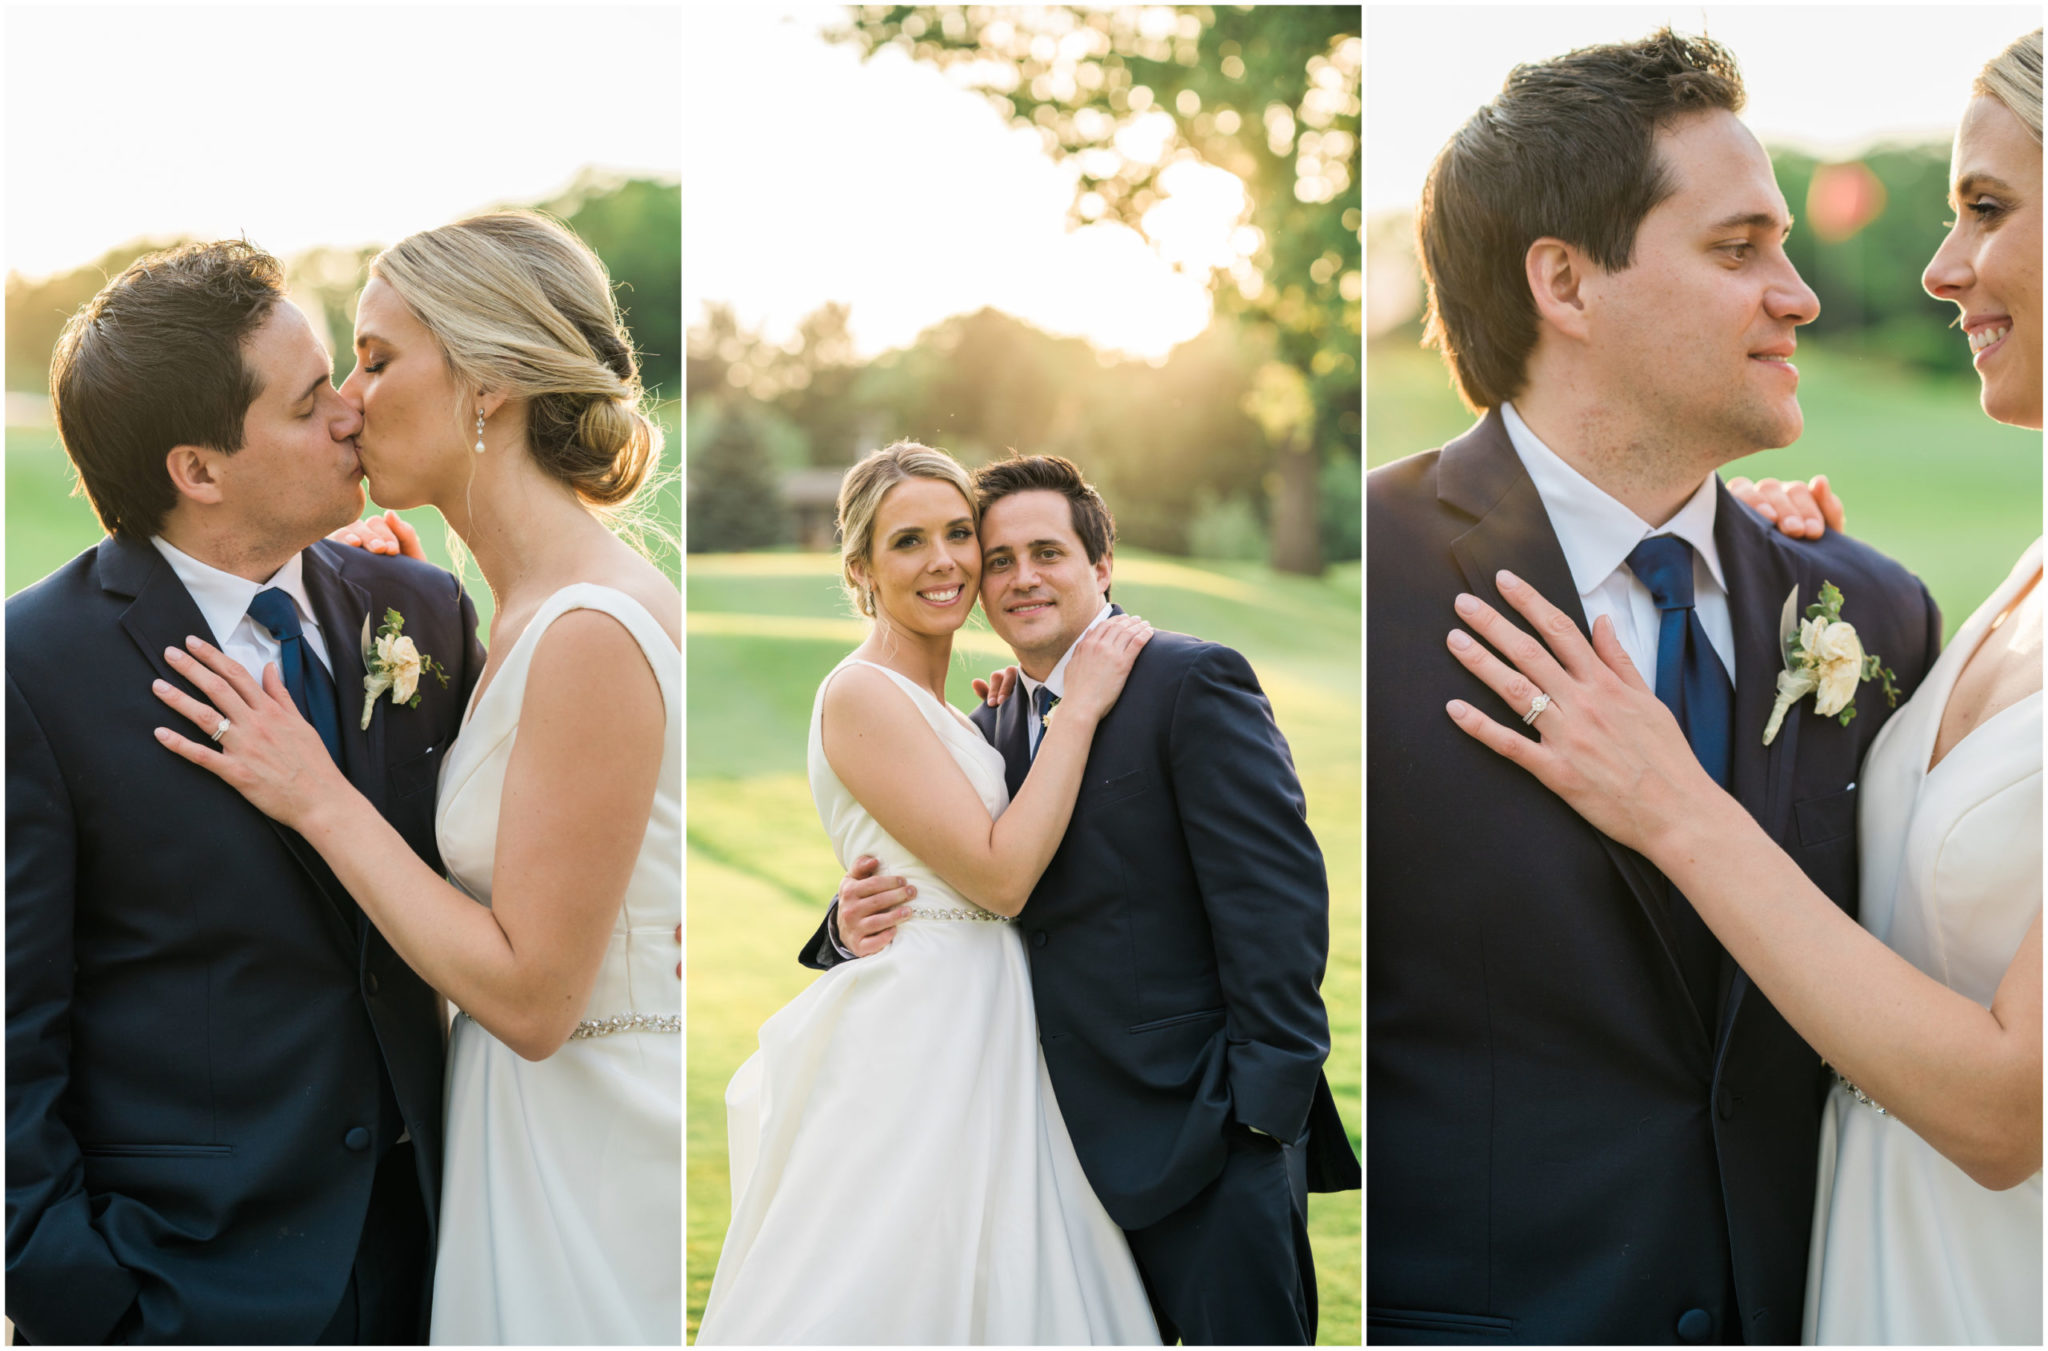 a bride and groom walking and smiling at each other during golden hour lighting portraits at their downtown detroit wedding